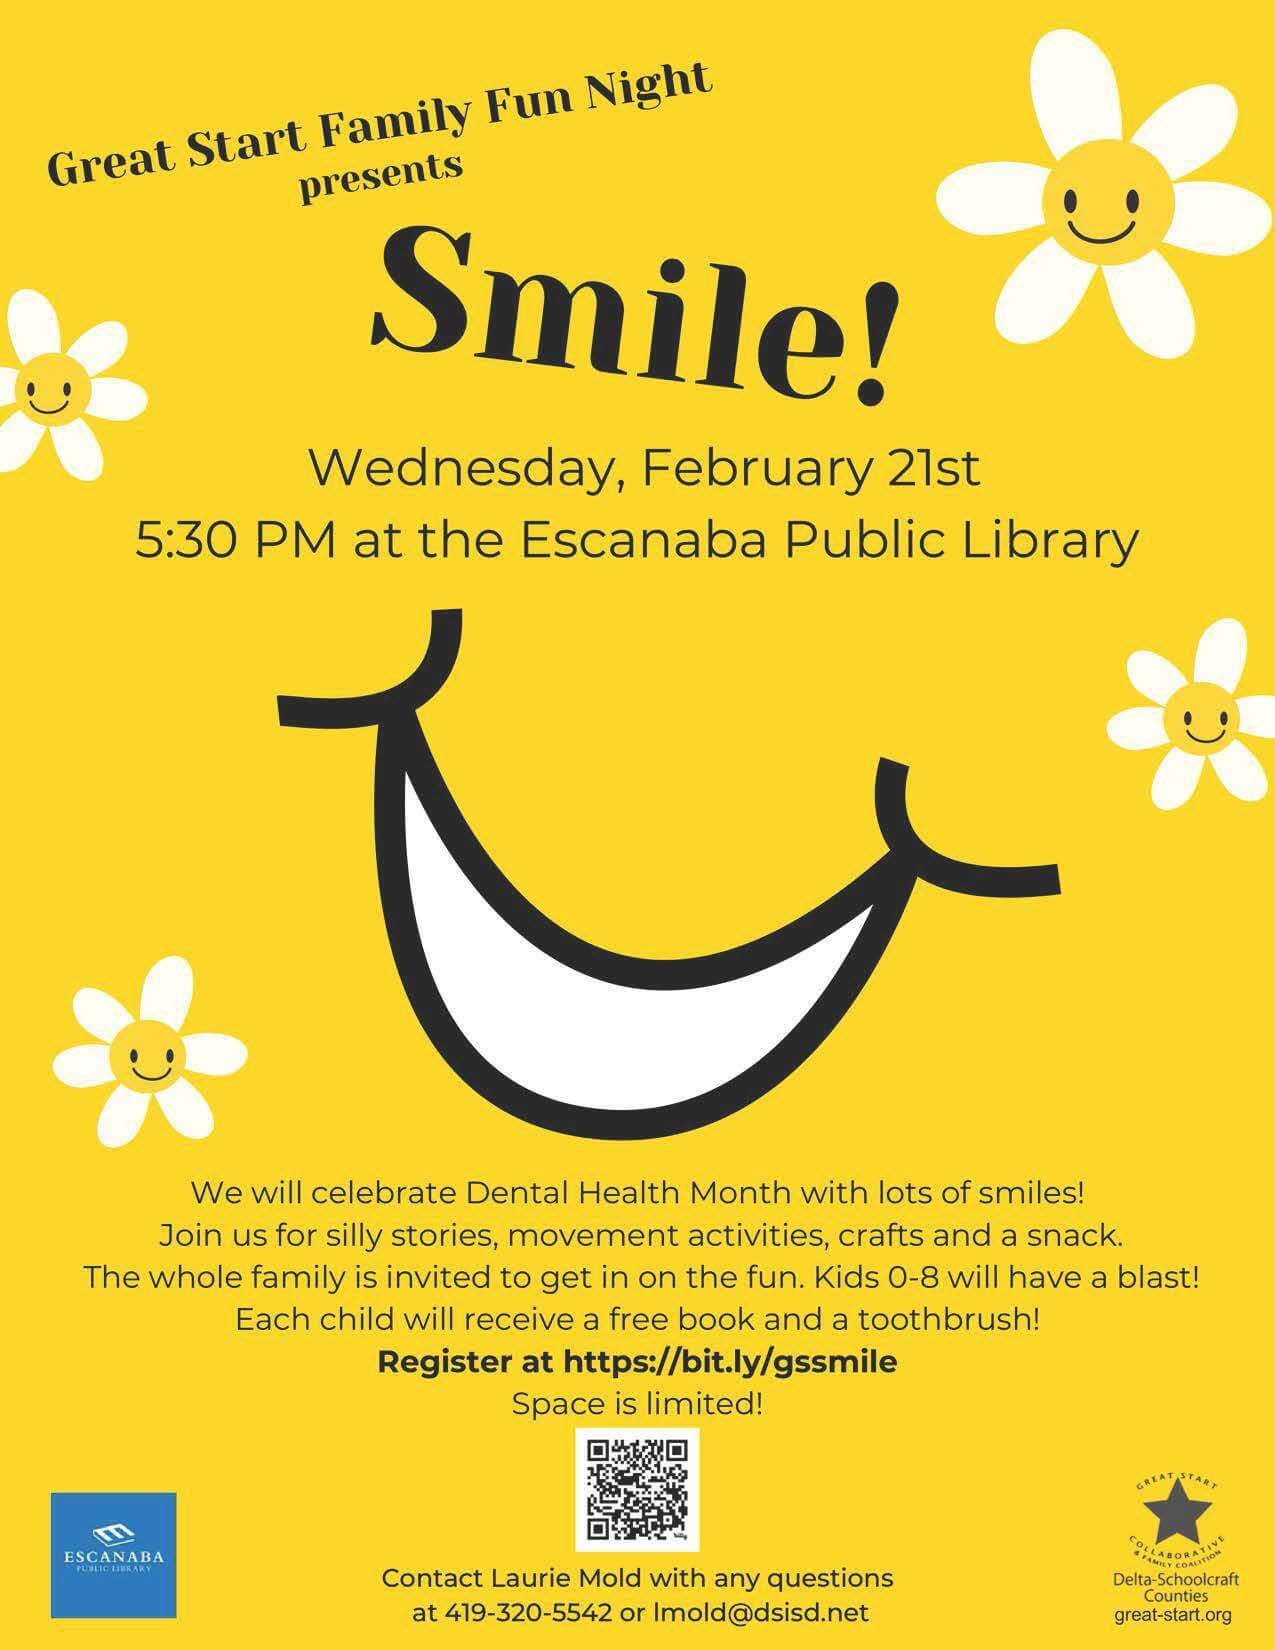 Great Start Family Fun Night presents SMILE!, Wednesday, February 21st. 5:30 PM at the Escanaba Public Library. We will celebrate Dental Health Month with lots of smiles! Join us for silly stories, movement activities, crafts and a snack. The whole family is invited to get in on the fun. Kids 0-8 will have a blast! Each child will receive a free book and a toothbrush! Register at https://bit.ly/gssmile Space is limited. Contact Laurie Mold with any questions at 419-320-5542 or lmold@dsisd.net